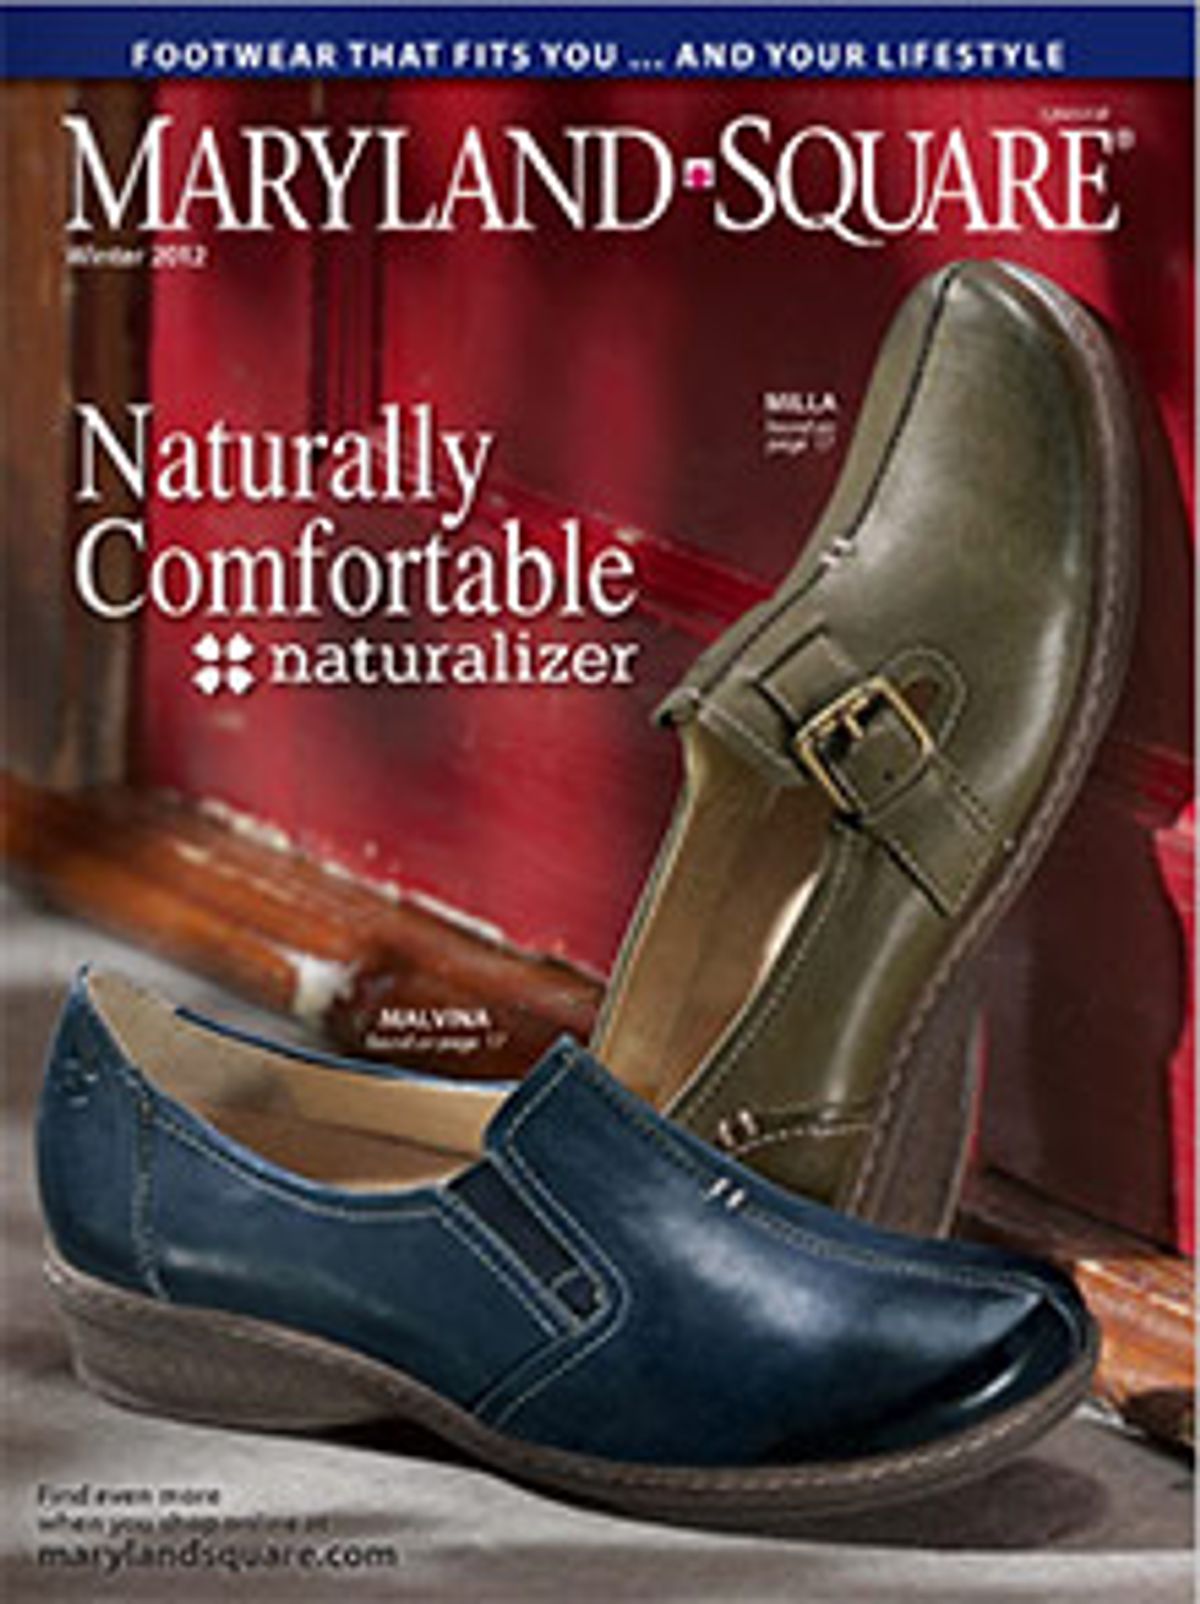 maryland square shoes coupons